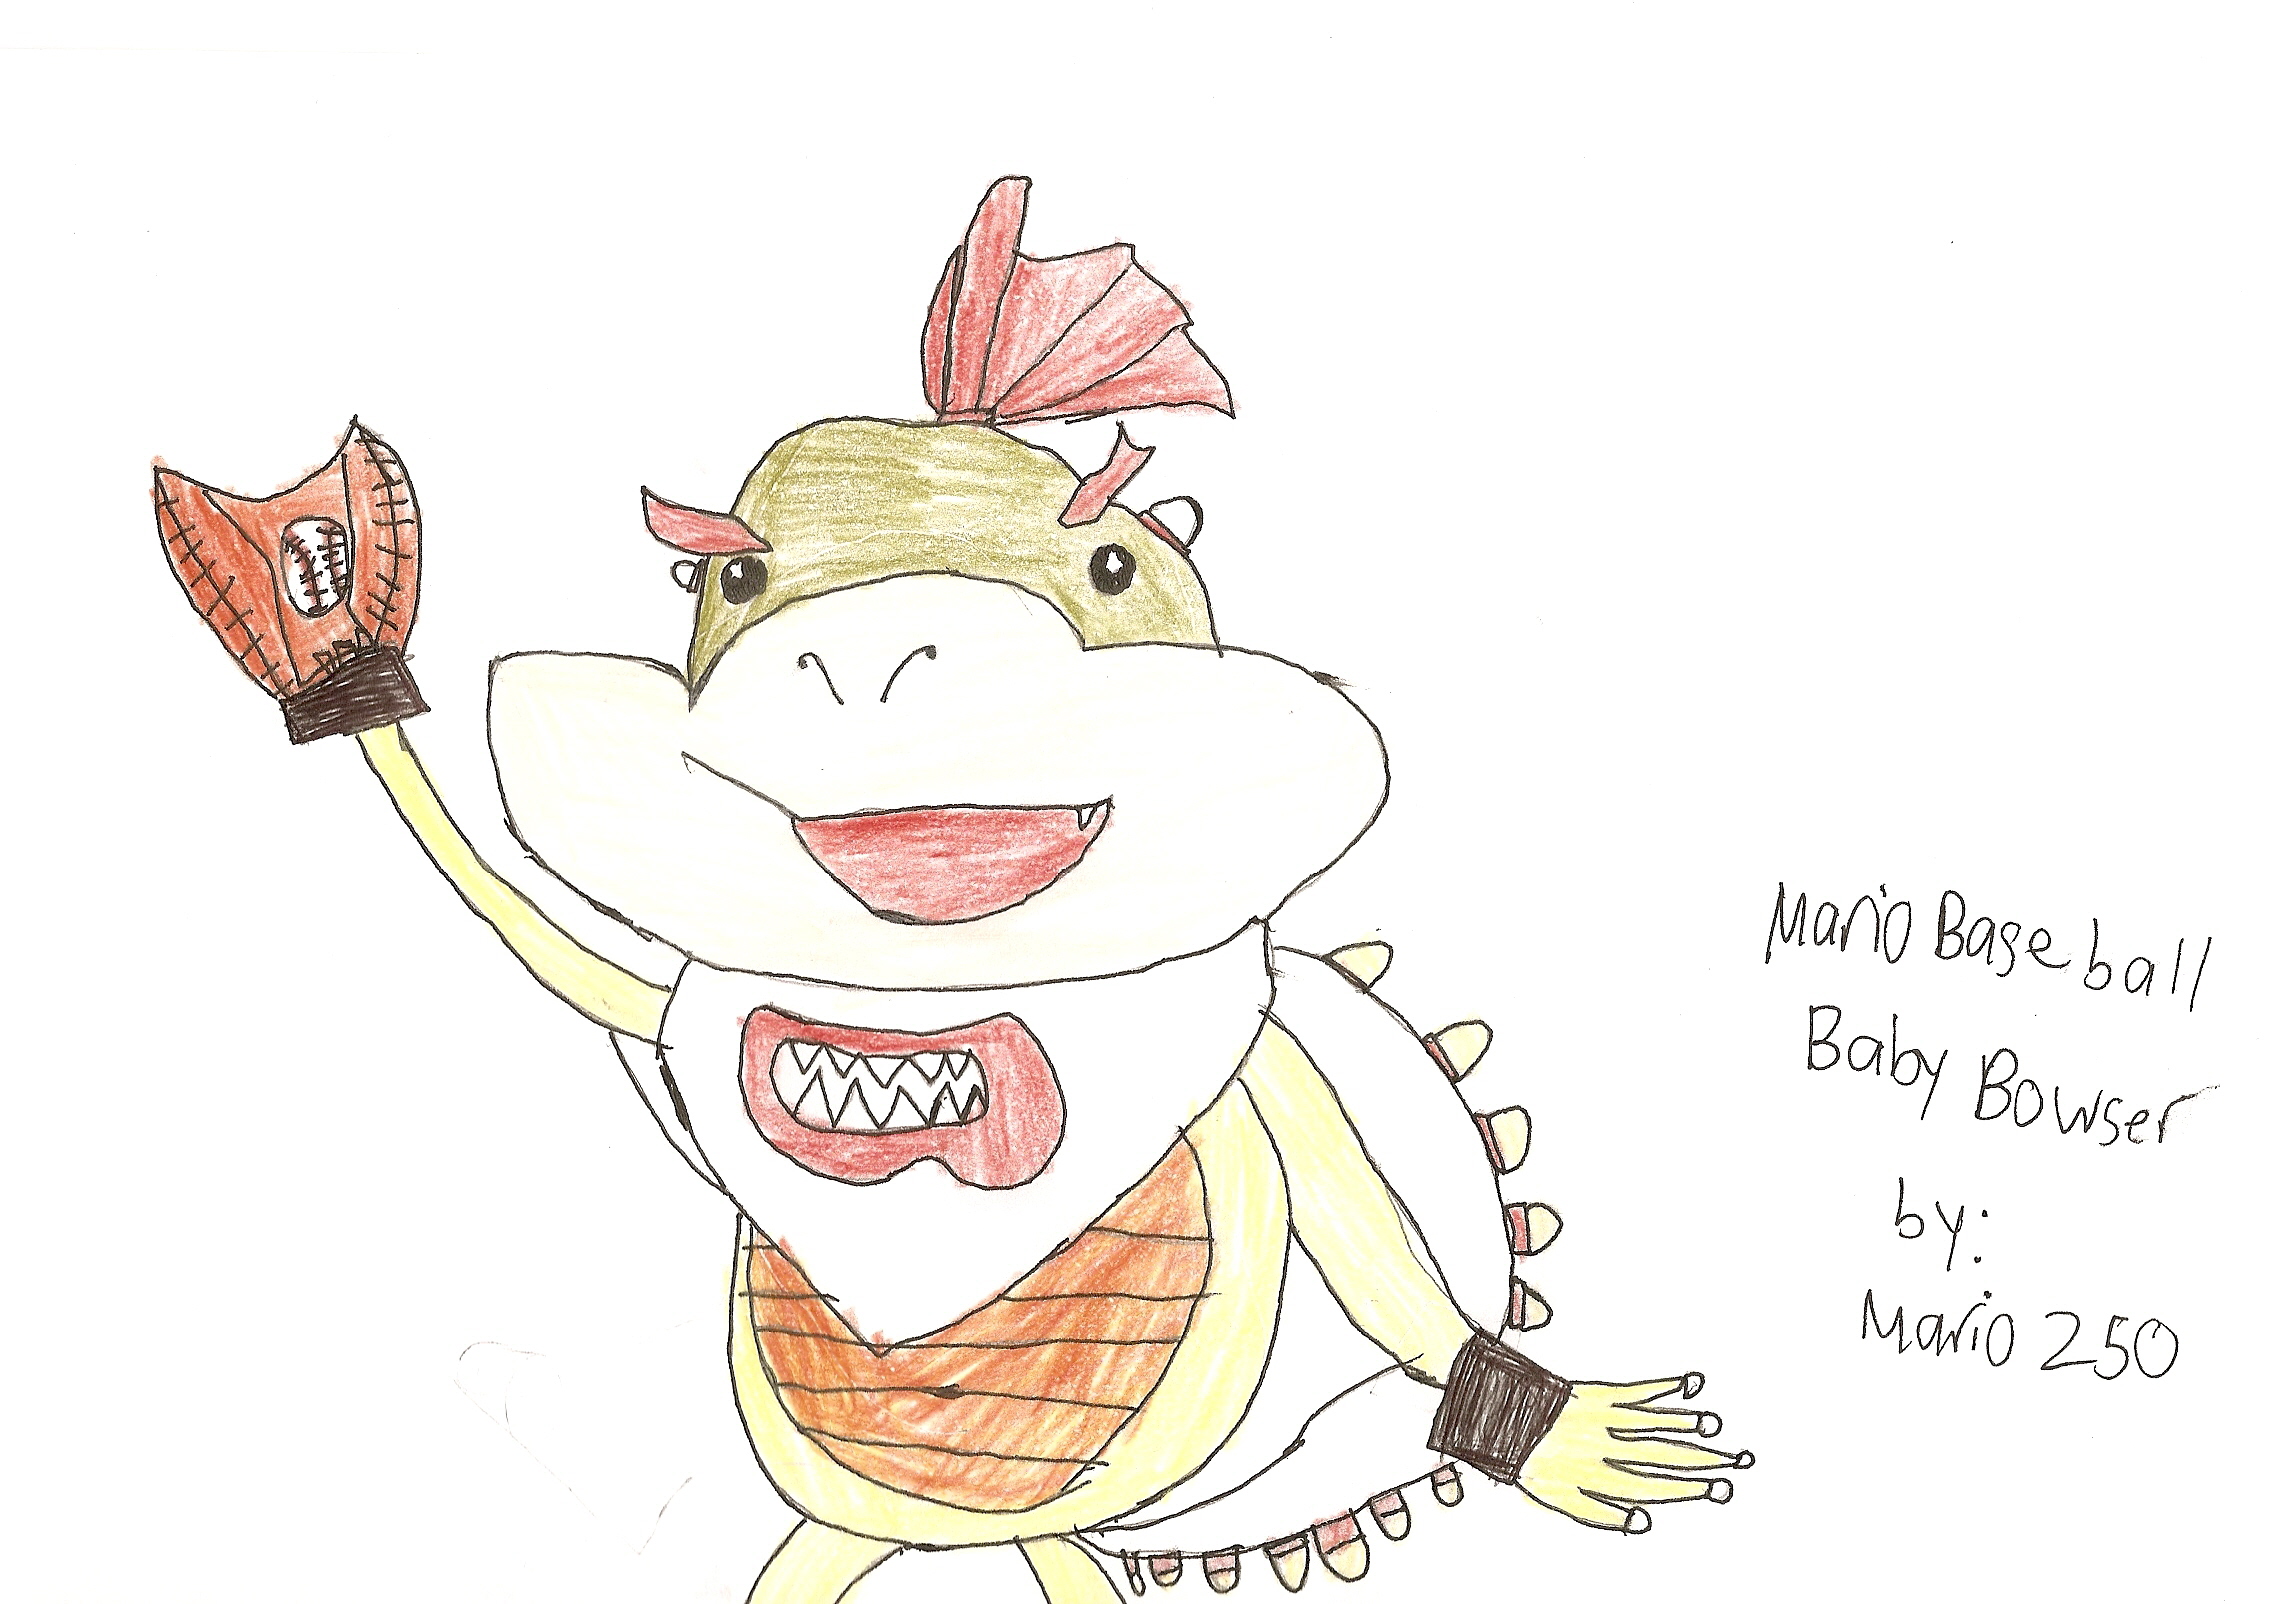 Baby Bowser by Mario250